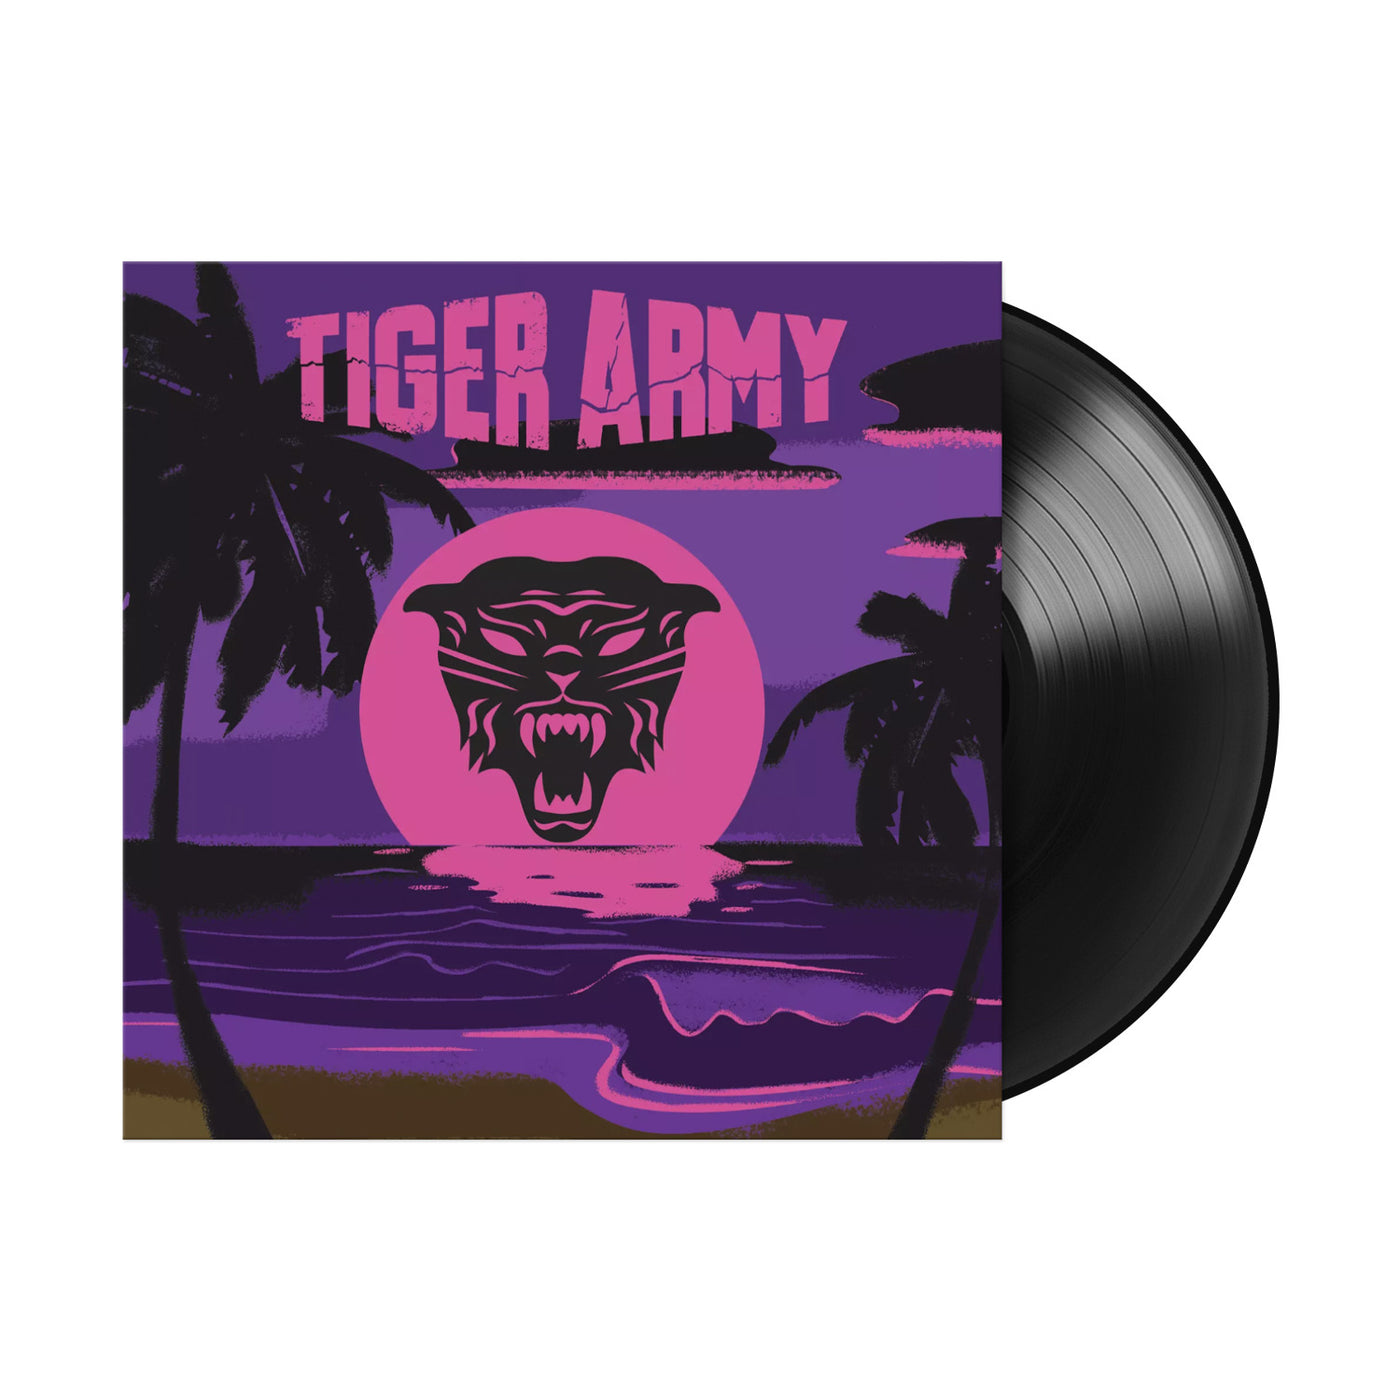 Tiger Armys Dark Paradise Black 7 Inch. LP exposed to show color. Album art depicts a tropical beach scene with a sunset and a panther face in the sun. 